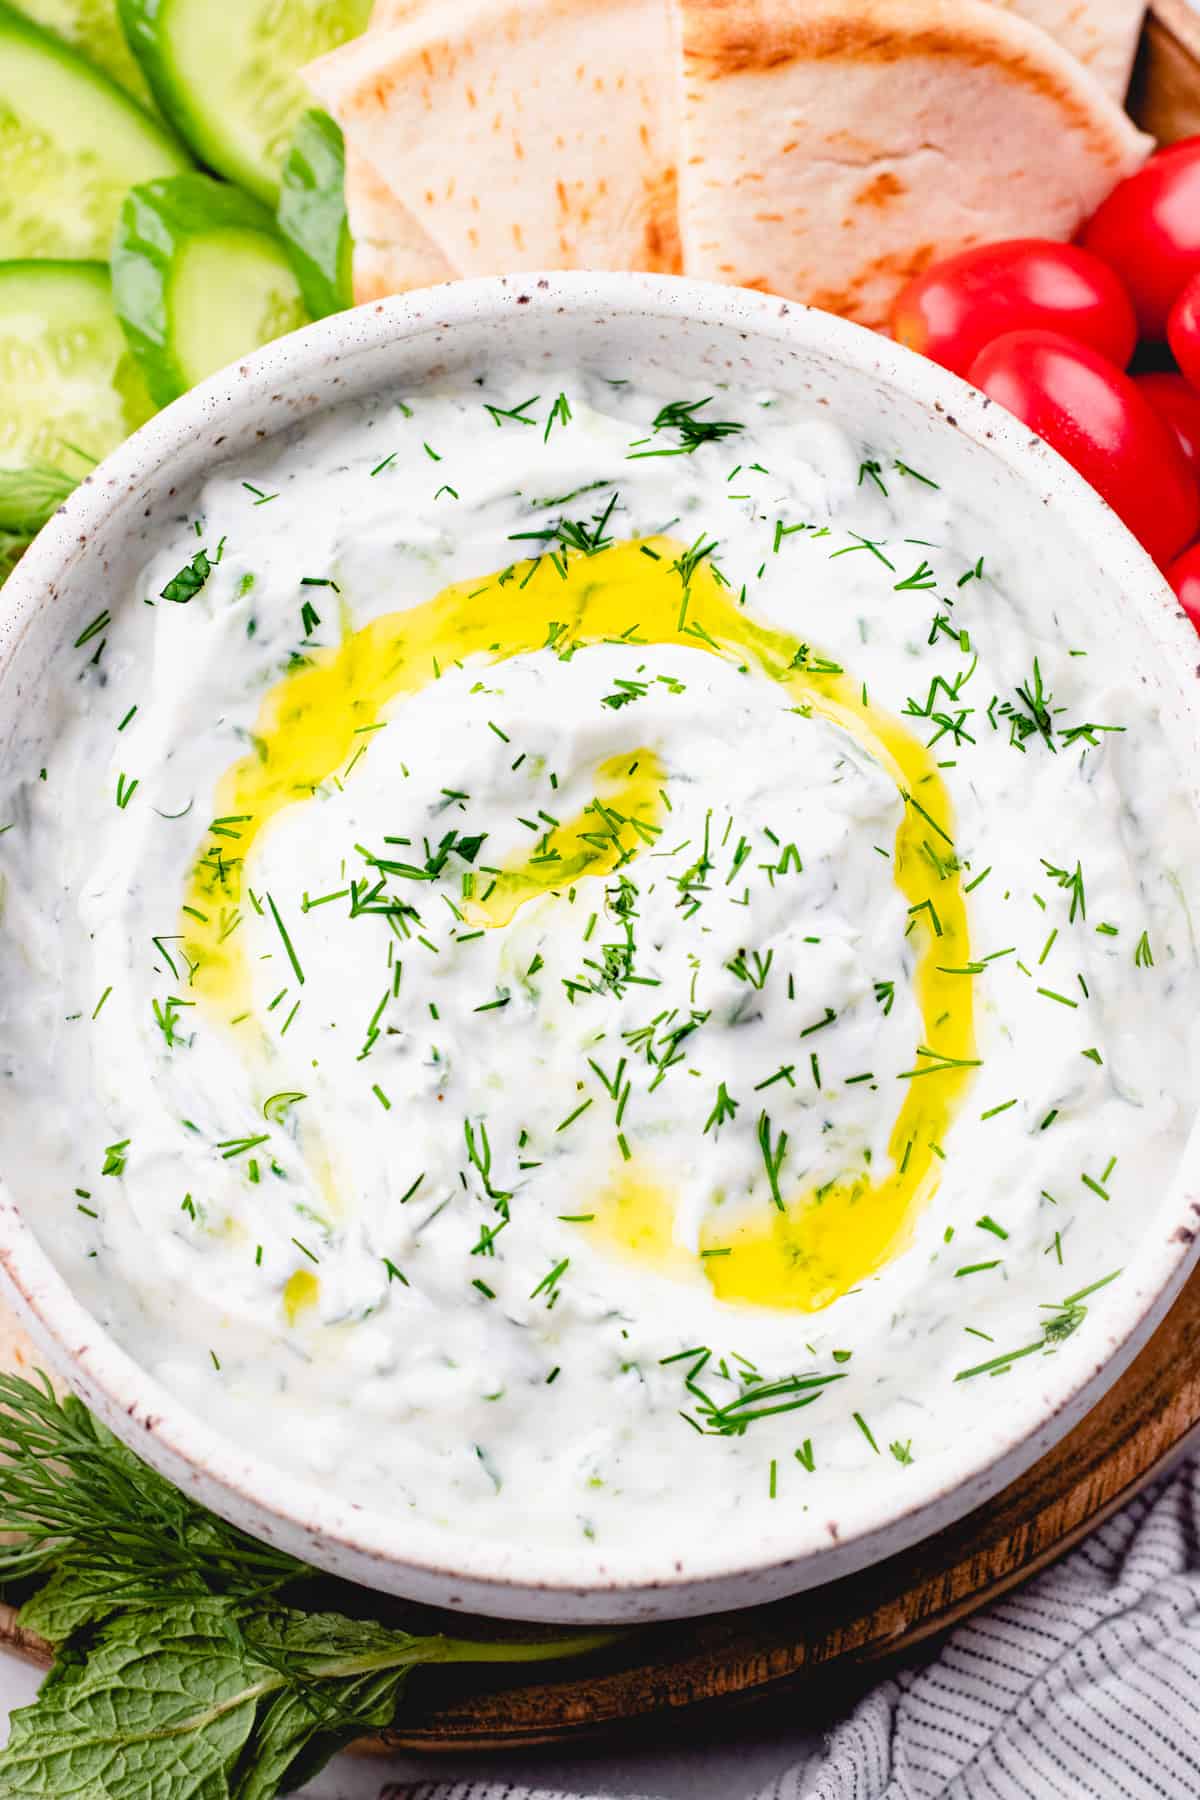 Tzatziki sauce, topped with olive oil and chopped dill, in a white bowl and vegetables and pita bread around it.